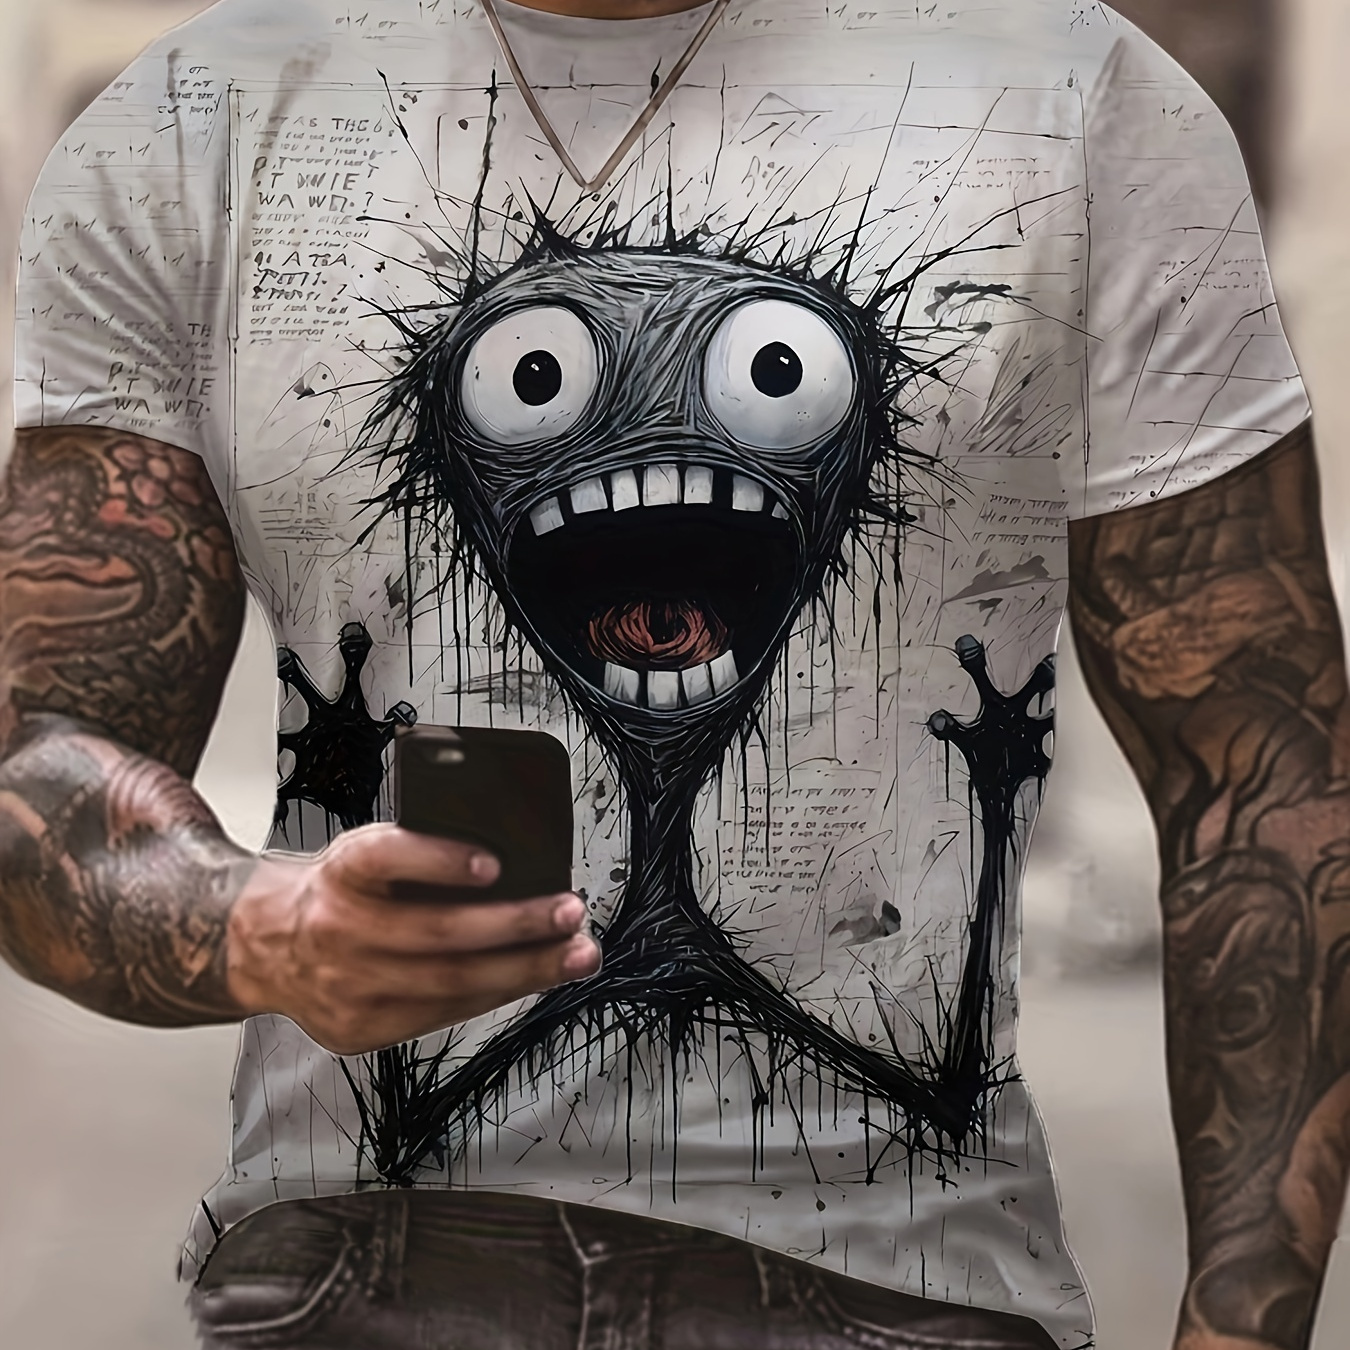 

Men's Chic And Stylish Screaming Monster Pattern Print Crew Neck Short Sleeve T-shirt, Comfy Tops For Summer Street Wear, Tees For Men